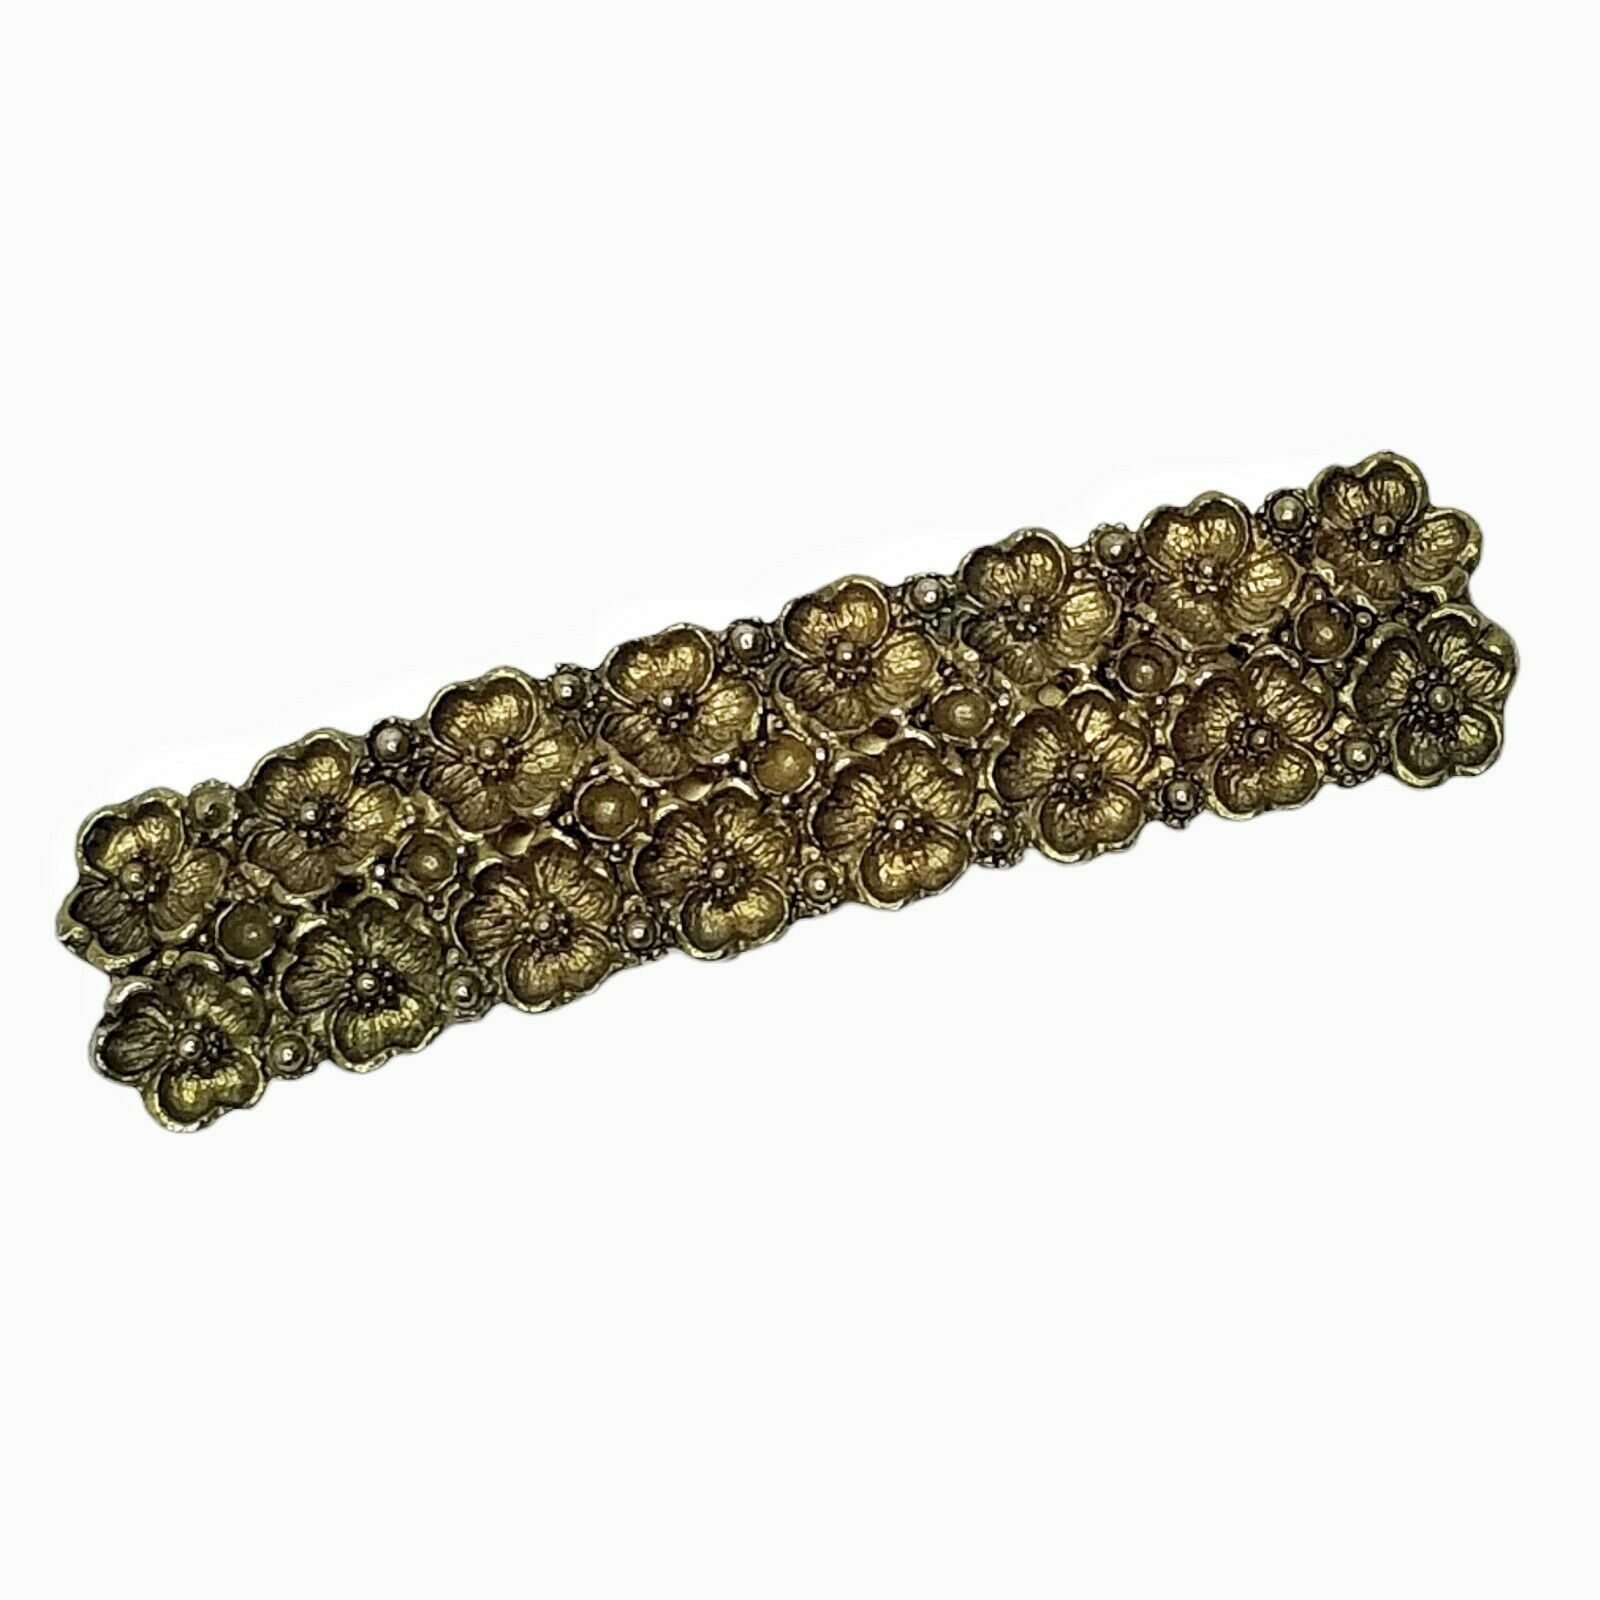 Vintage 1980's French Barrette Hair Clip Gold Floral Metal Patter Accessory